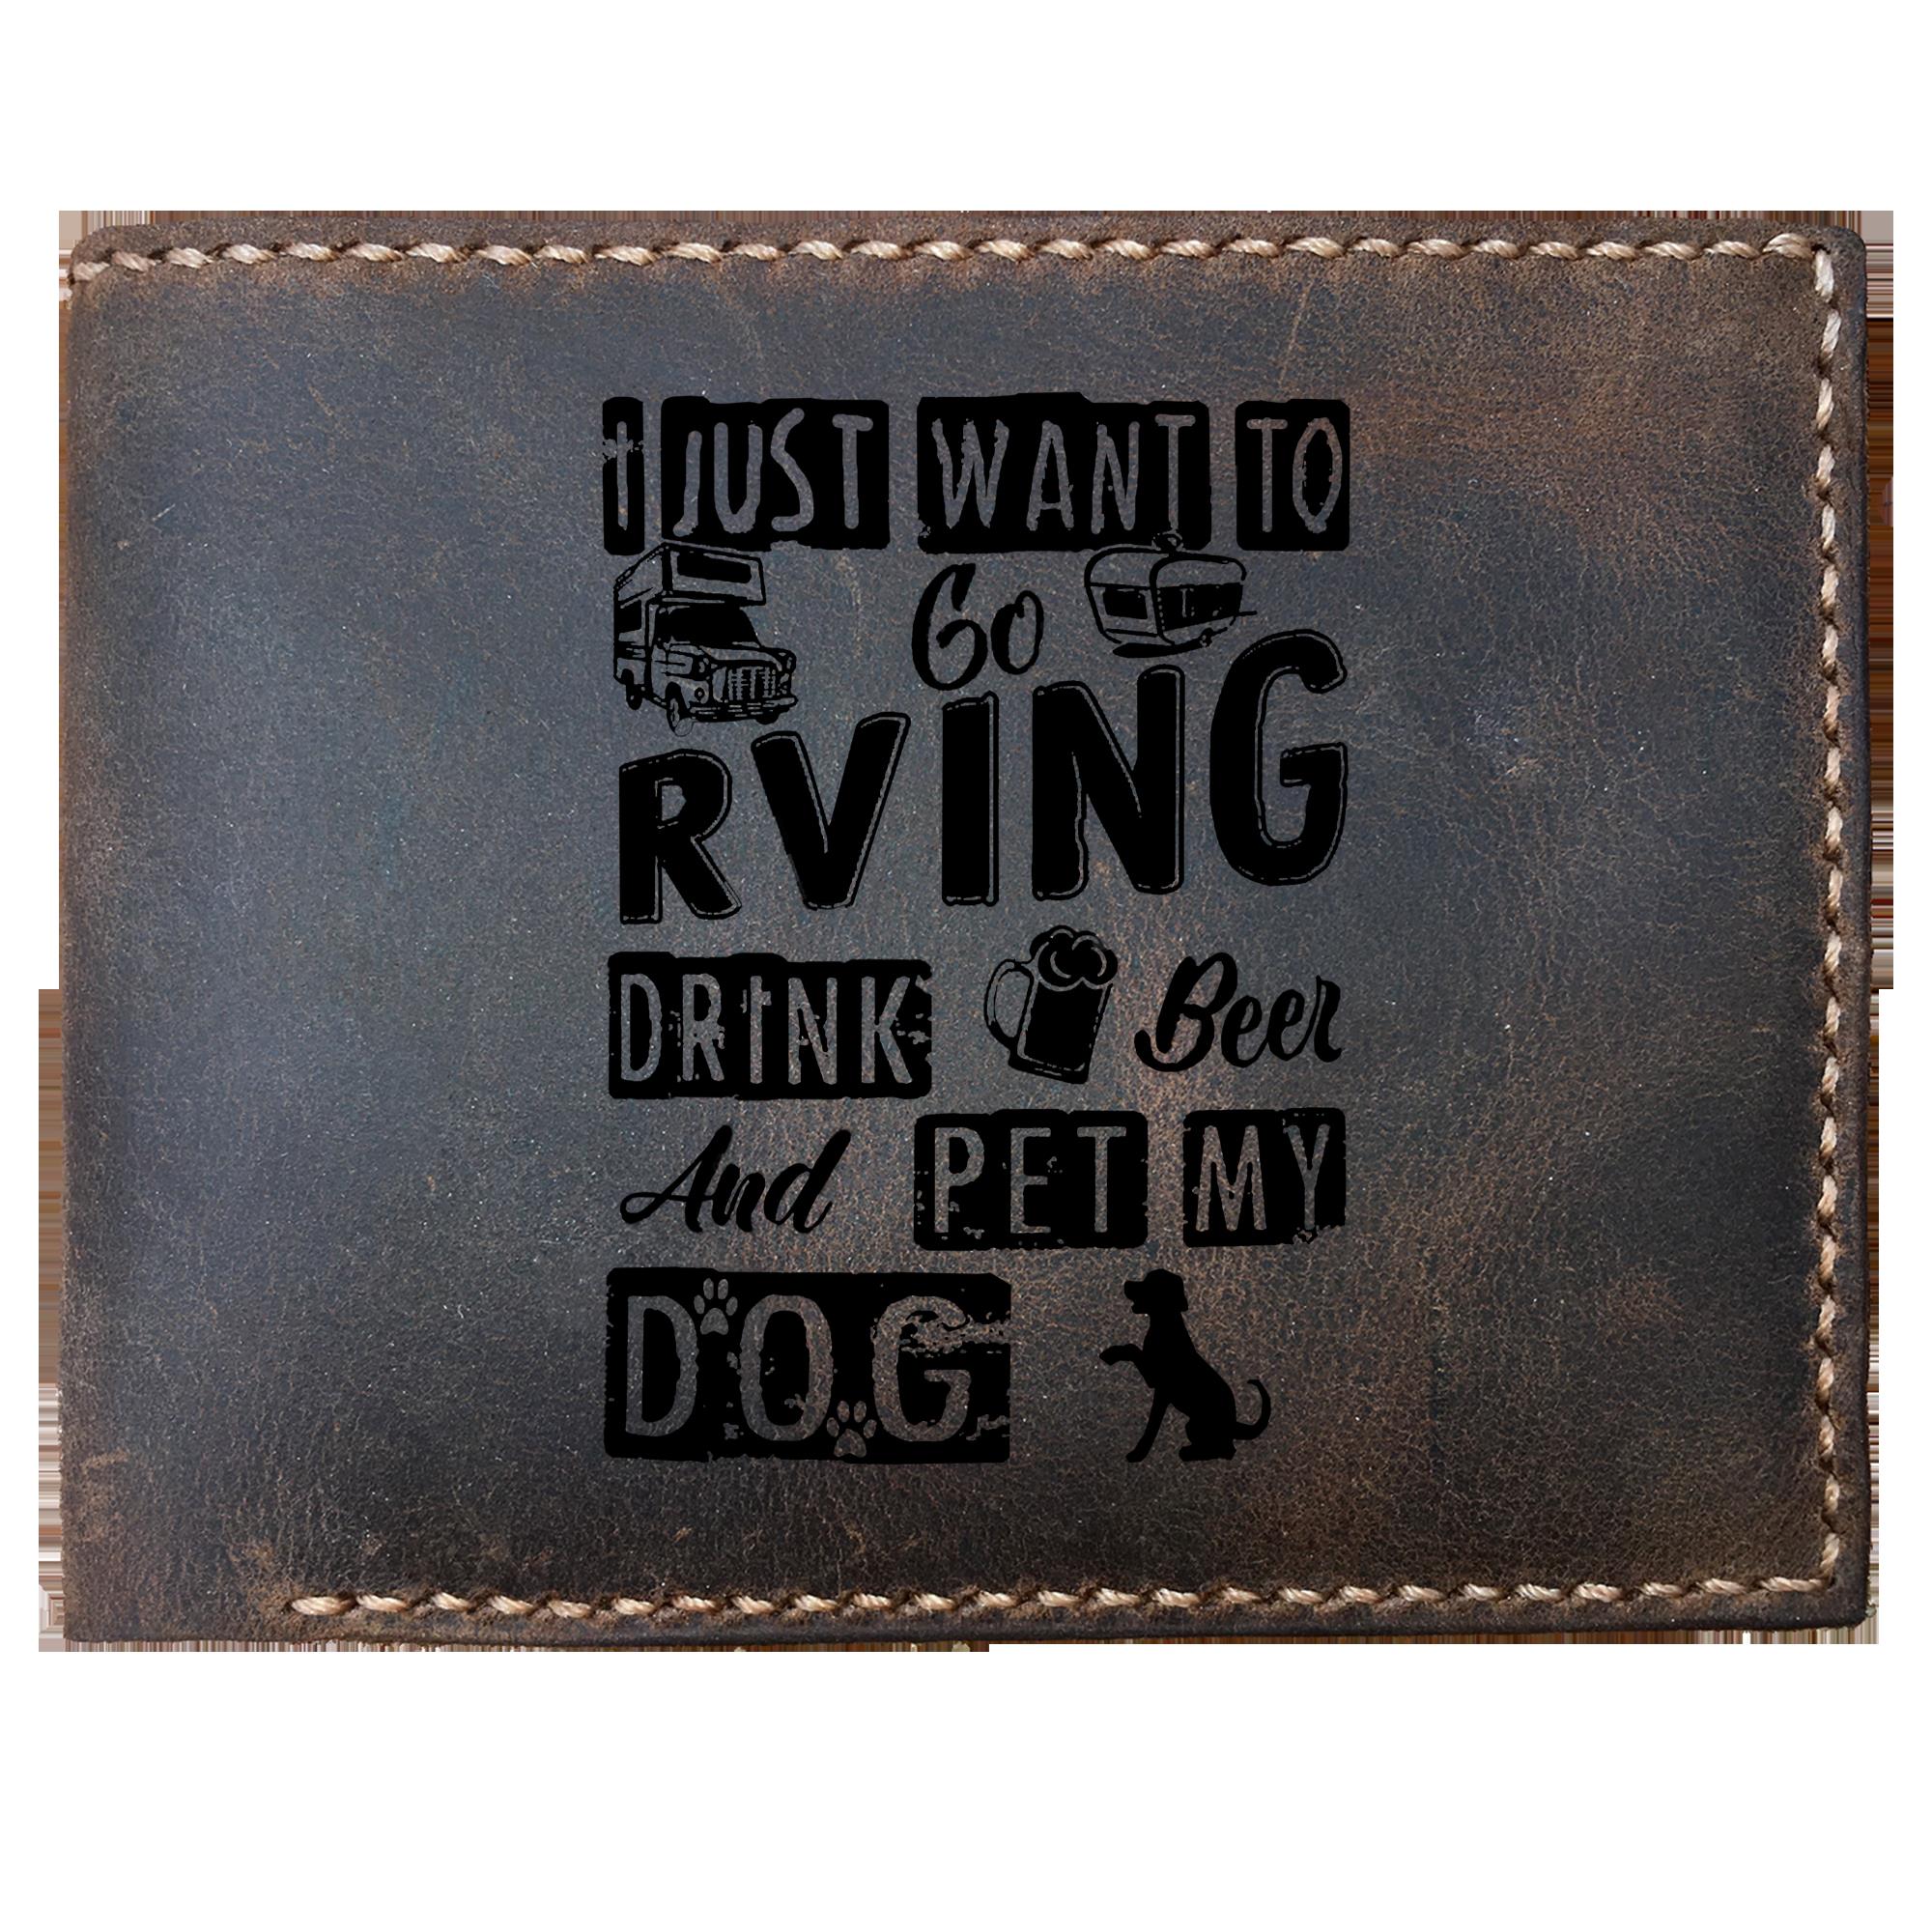 Skitongifts Funny Custom Laser Engraved Bifold Leather Wallet For Men, I Just Want To Go Rving Drink Beer And Pet My Dog Funny